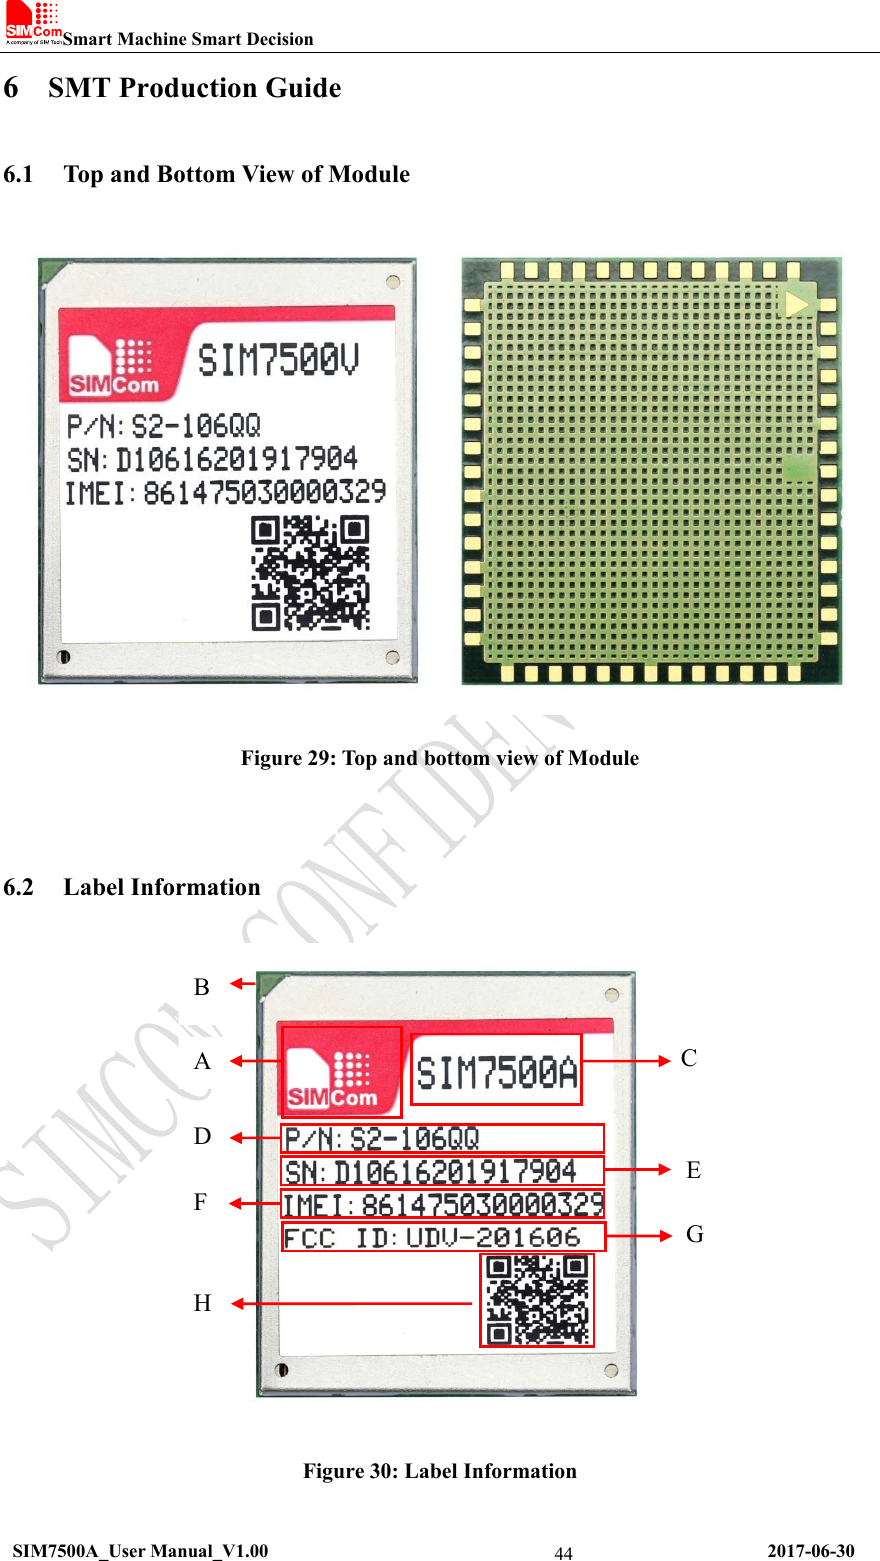 Smart Machine Smart Decision   SIM7500A_User Manual_V1.00                                                      2017-06-30 446 SMT Production Guide 6.1 Top and Bottom View of Module  Figure 29: Top and bottom view of Module  6.2 Label Information  Figure 30: Label Information A D F H B G C E 